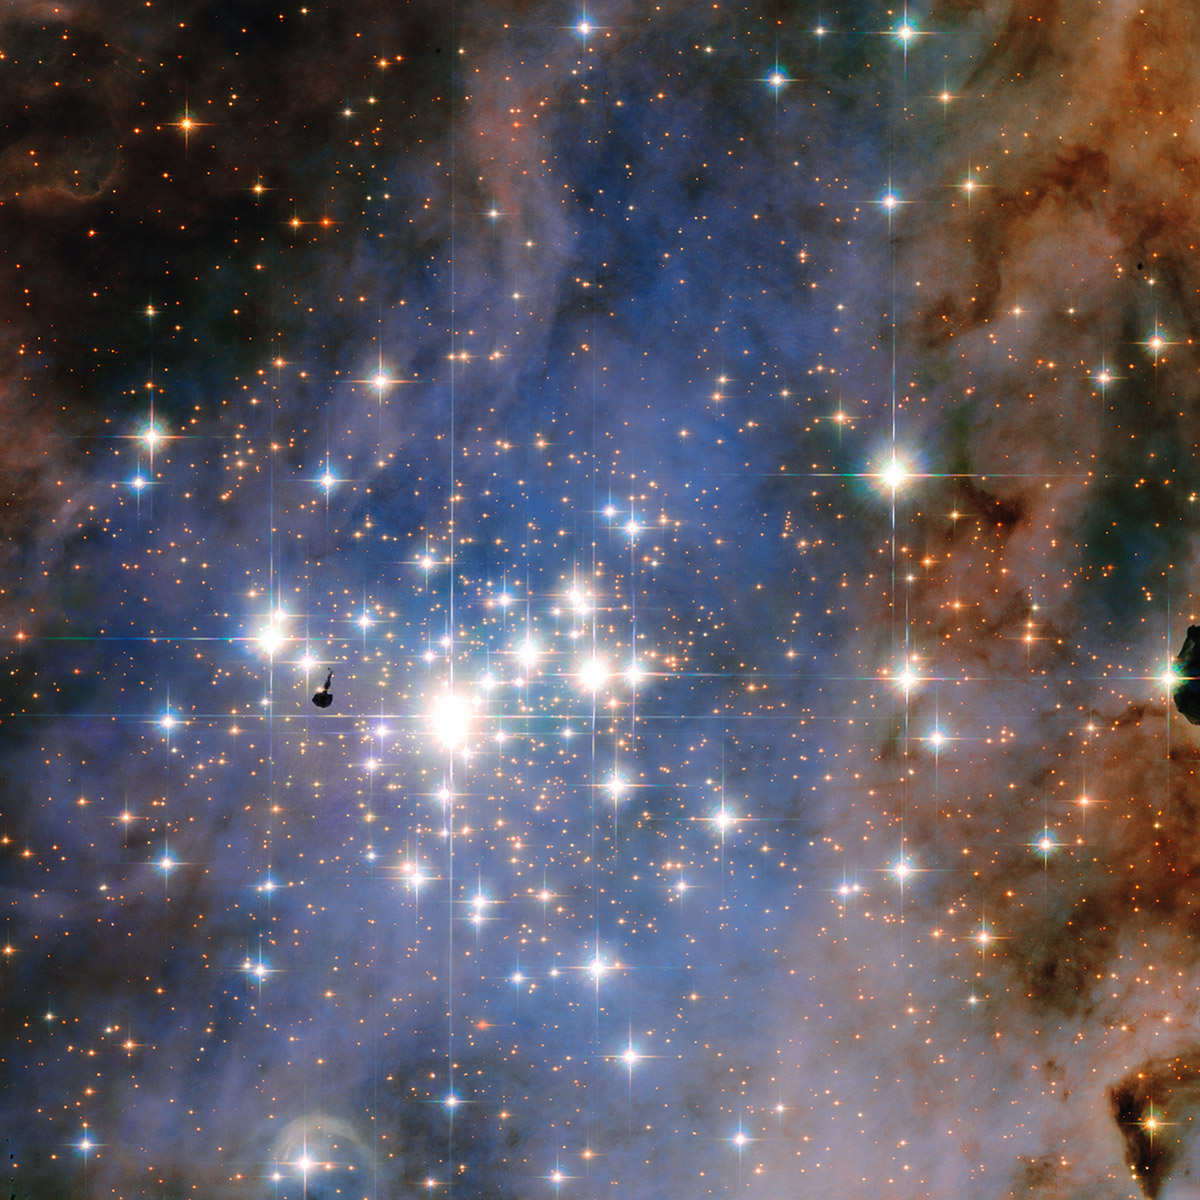 Resembling an opulent diamond tapestry, this image from NASA's Hubble Space Telescope shows a glittering star cluster that contains a collection of some of the brightest stars seen in our Milky Way galaxy. Called Trumpler 14, it is located 8,000 light-years away in the Carina Nebula, a huge star-formation region. Because the cluster is only 500,000 years old, it has one of the highest concentrations of massive, luminous stars in the entire Milky Way. Jan. 21, 2016.